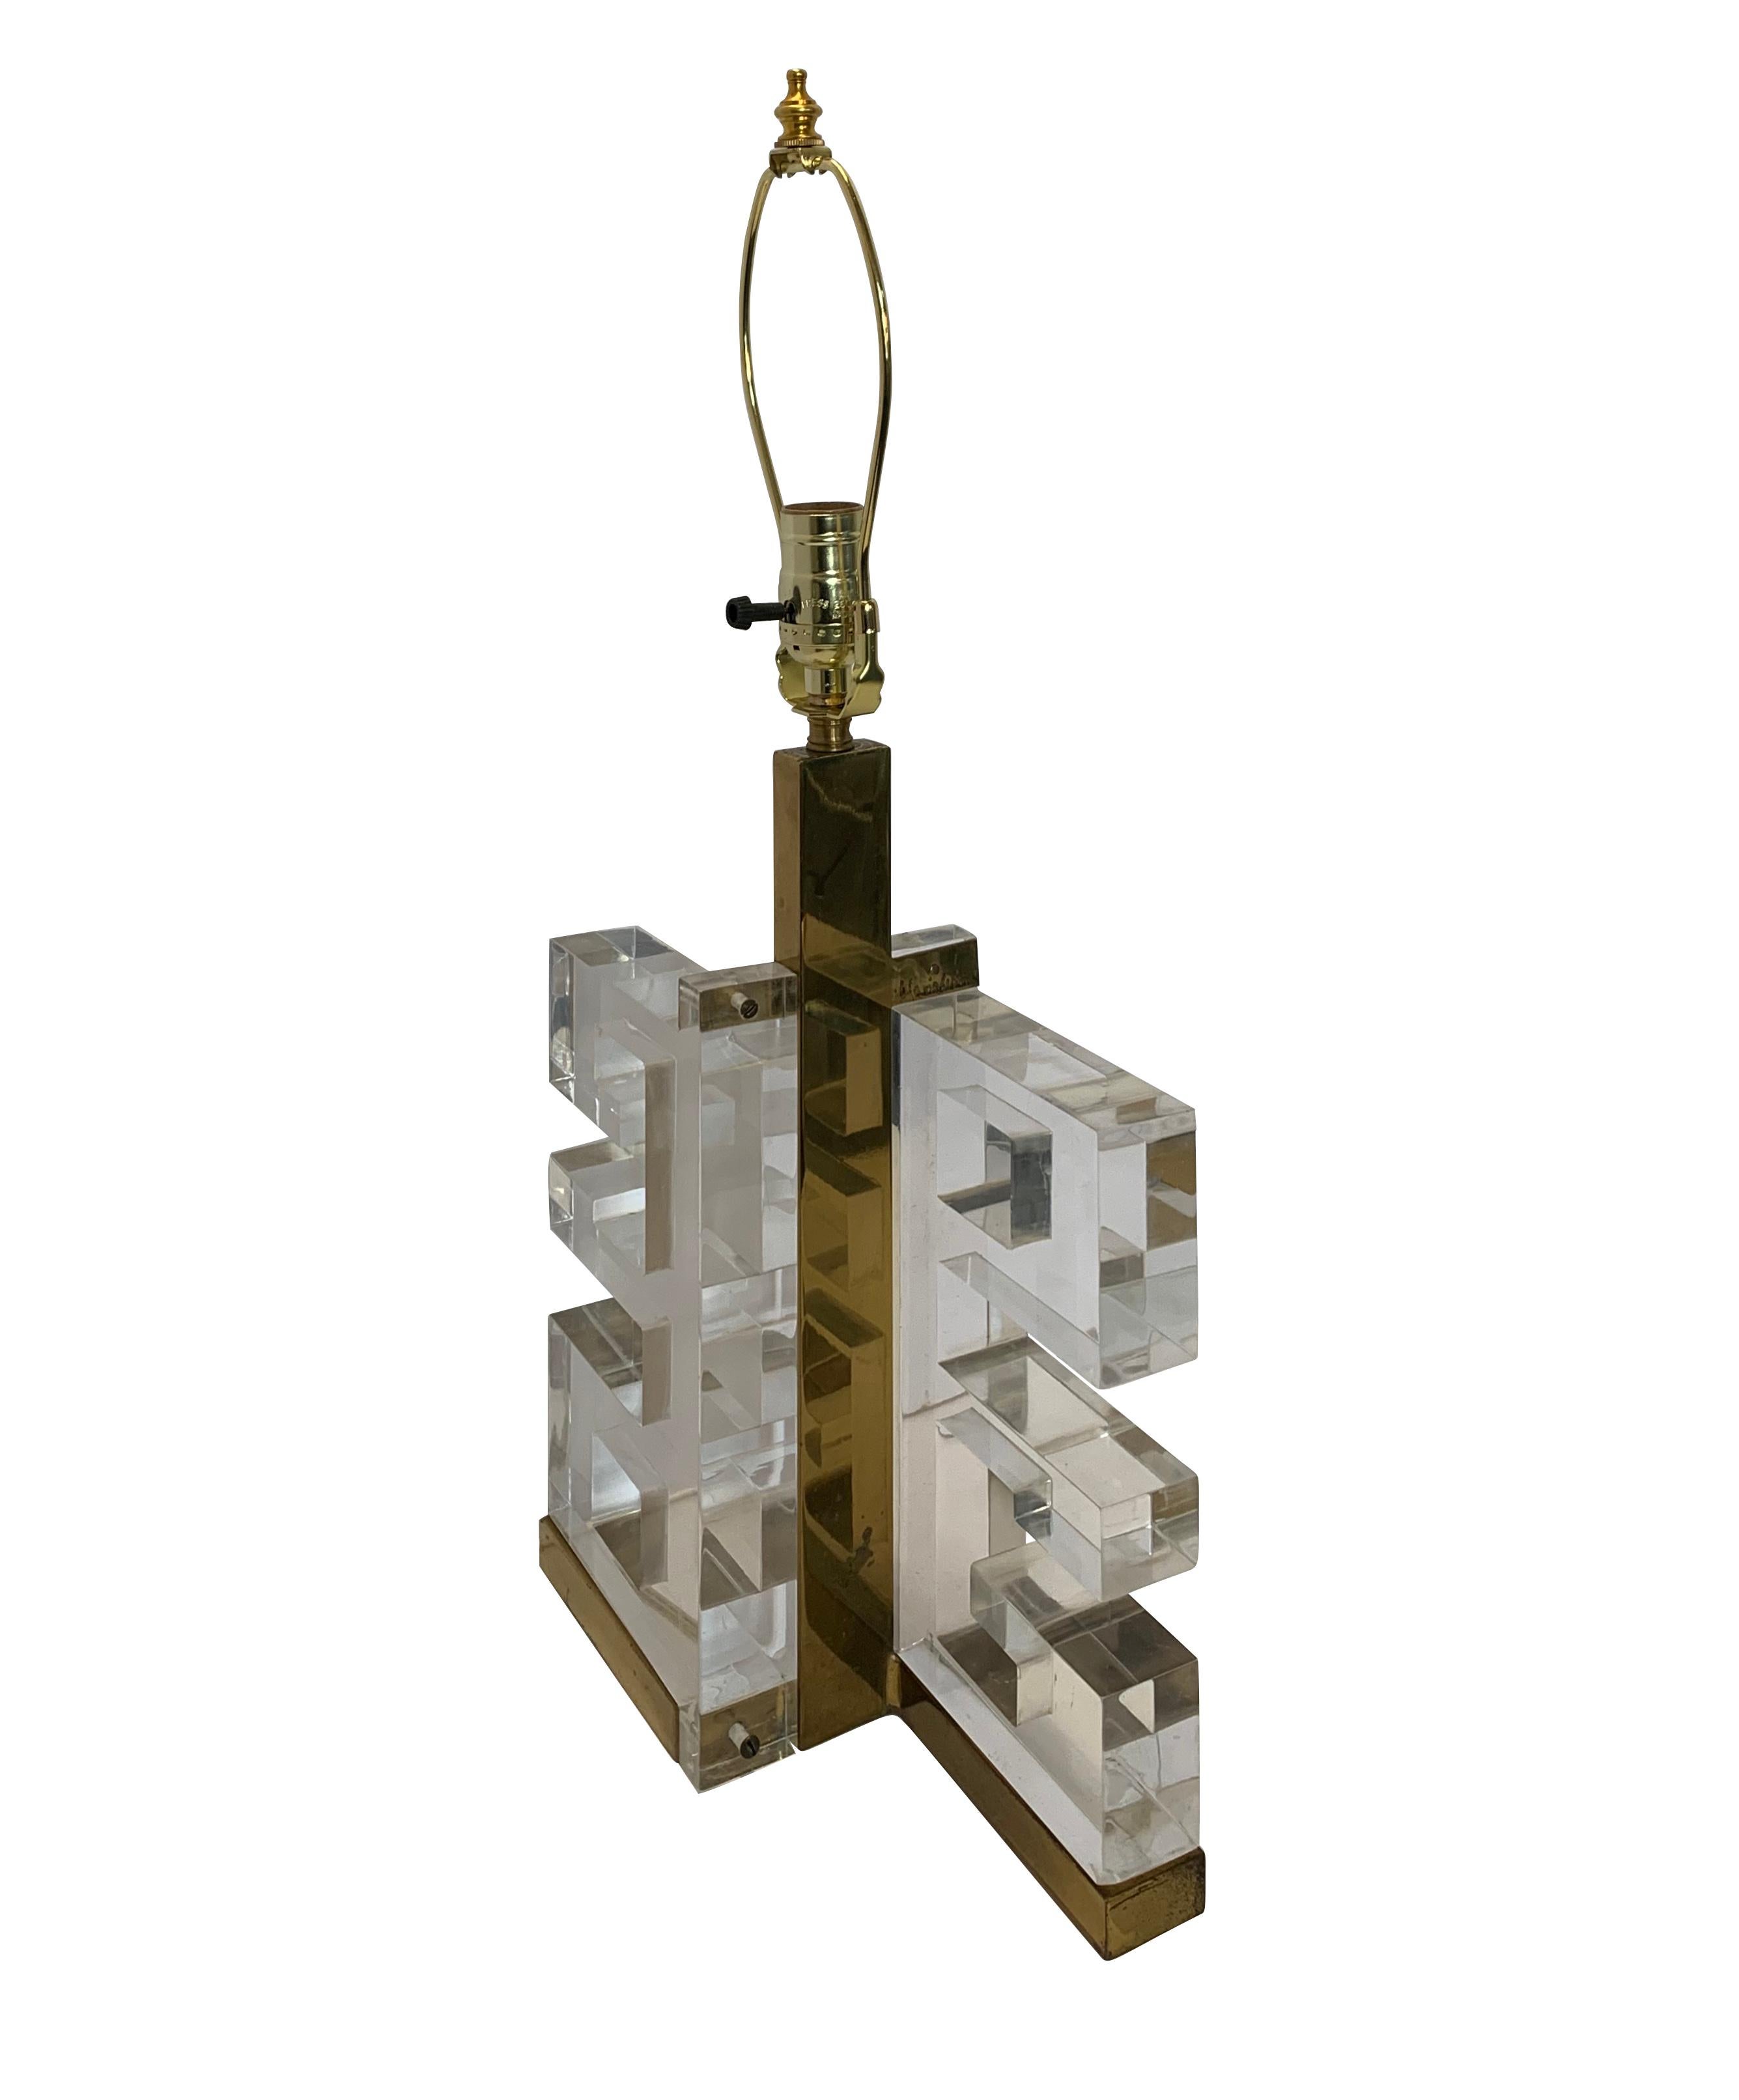 Italian Pair of Lucite and Brass Greek Key Design Lamps, Italy, 1950s